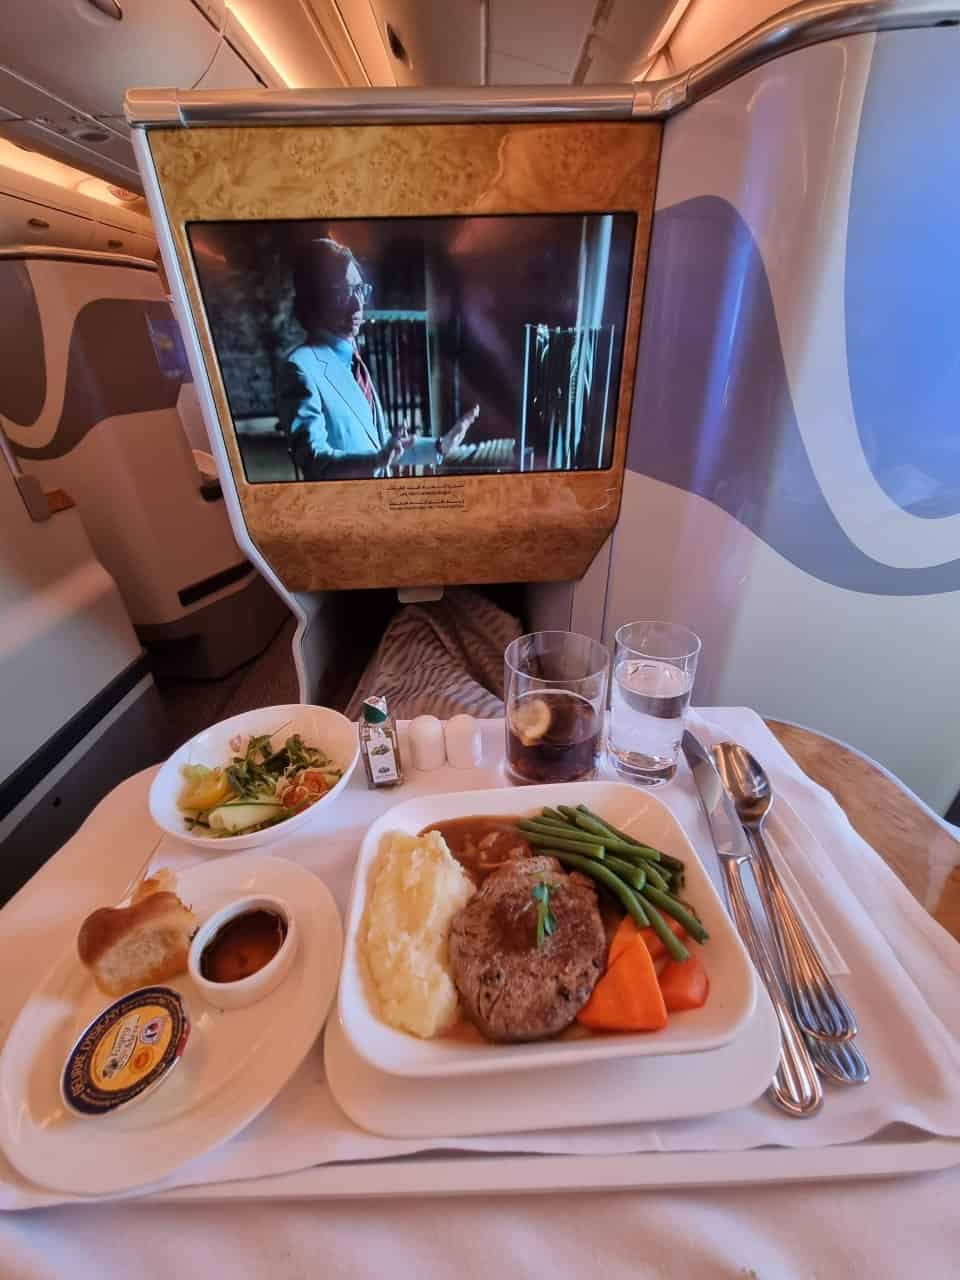 Do Emirates Provide Food: In-Flight Dining Options Explained